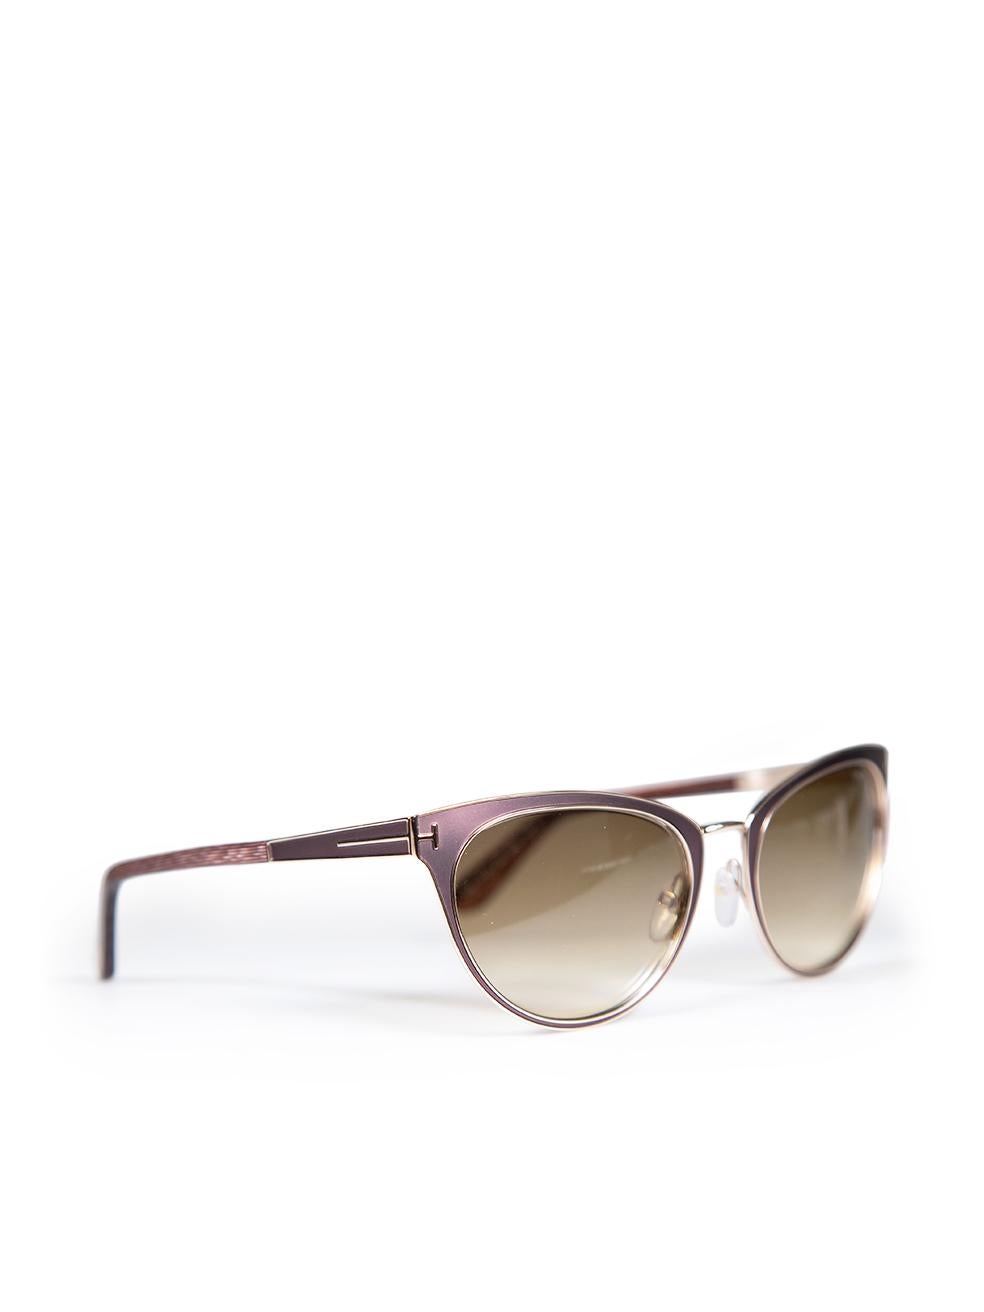 Tom Ford Shiny Dark Brown Nina Cat Eye Sunglasses In New Condition For Sale In London, GB